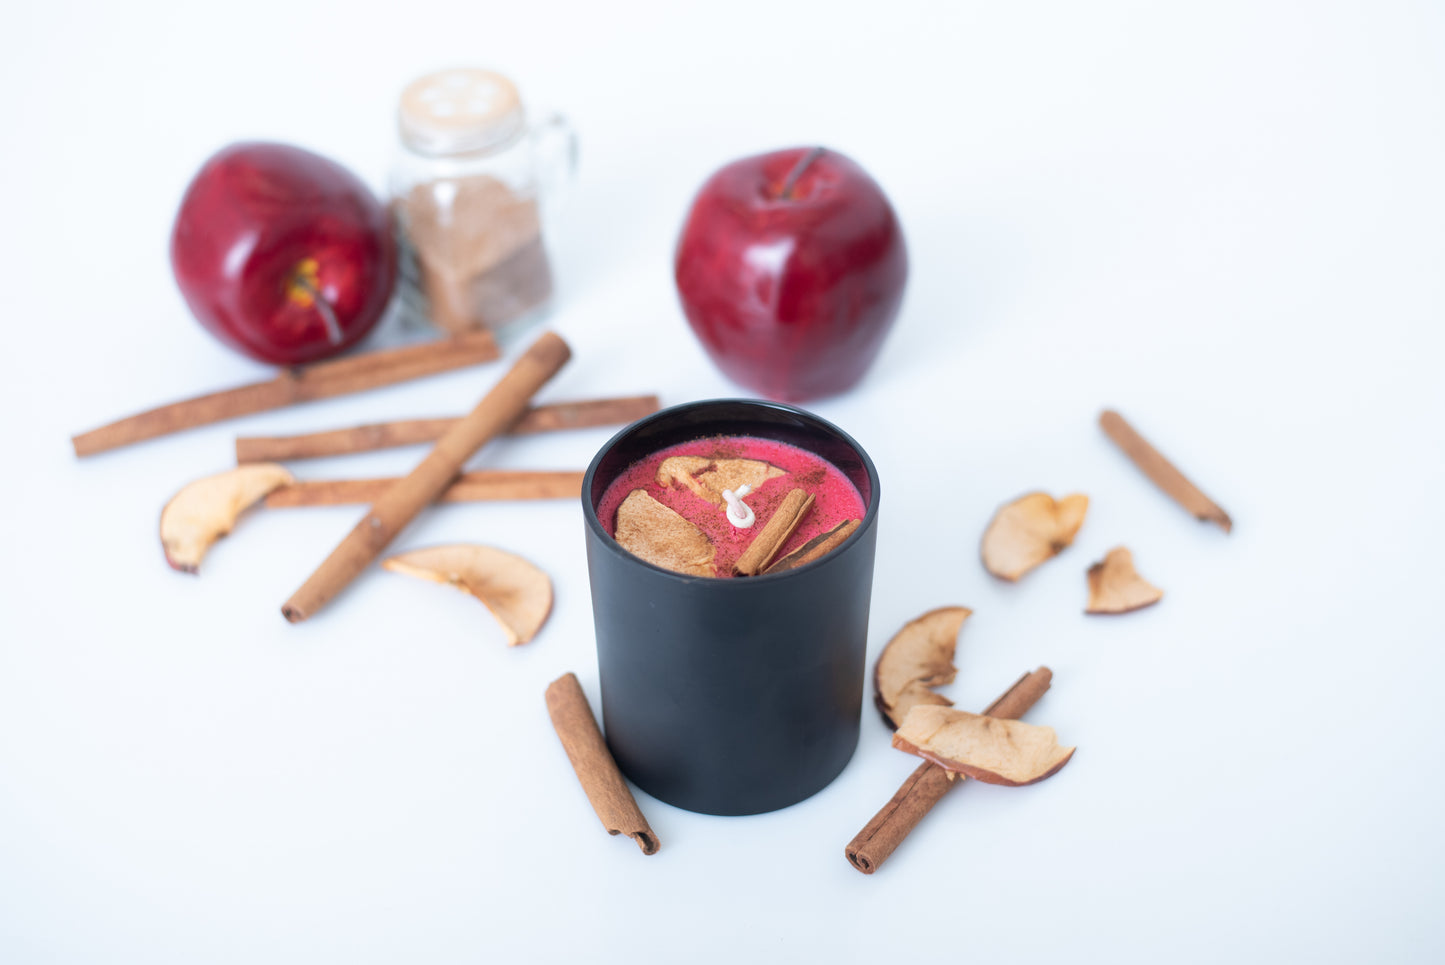 the apple spice candle